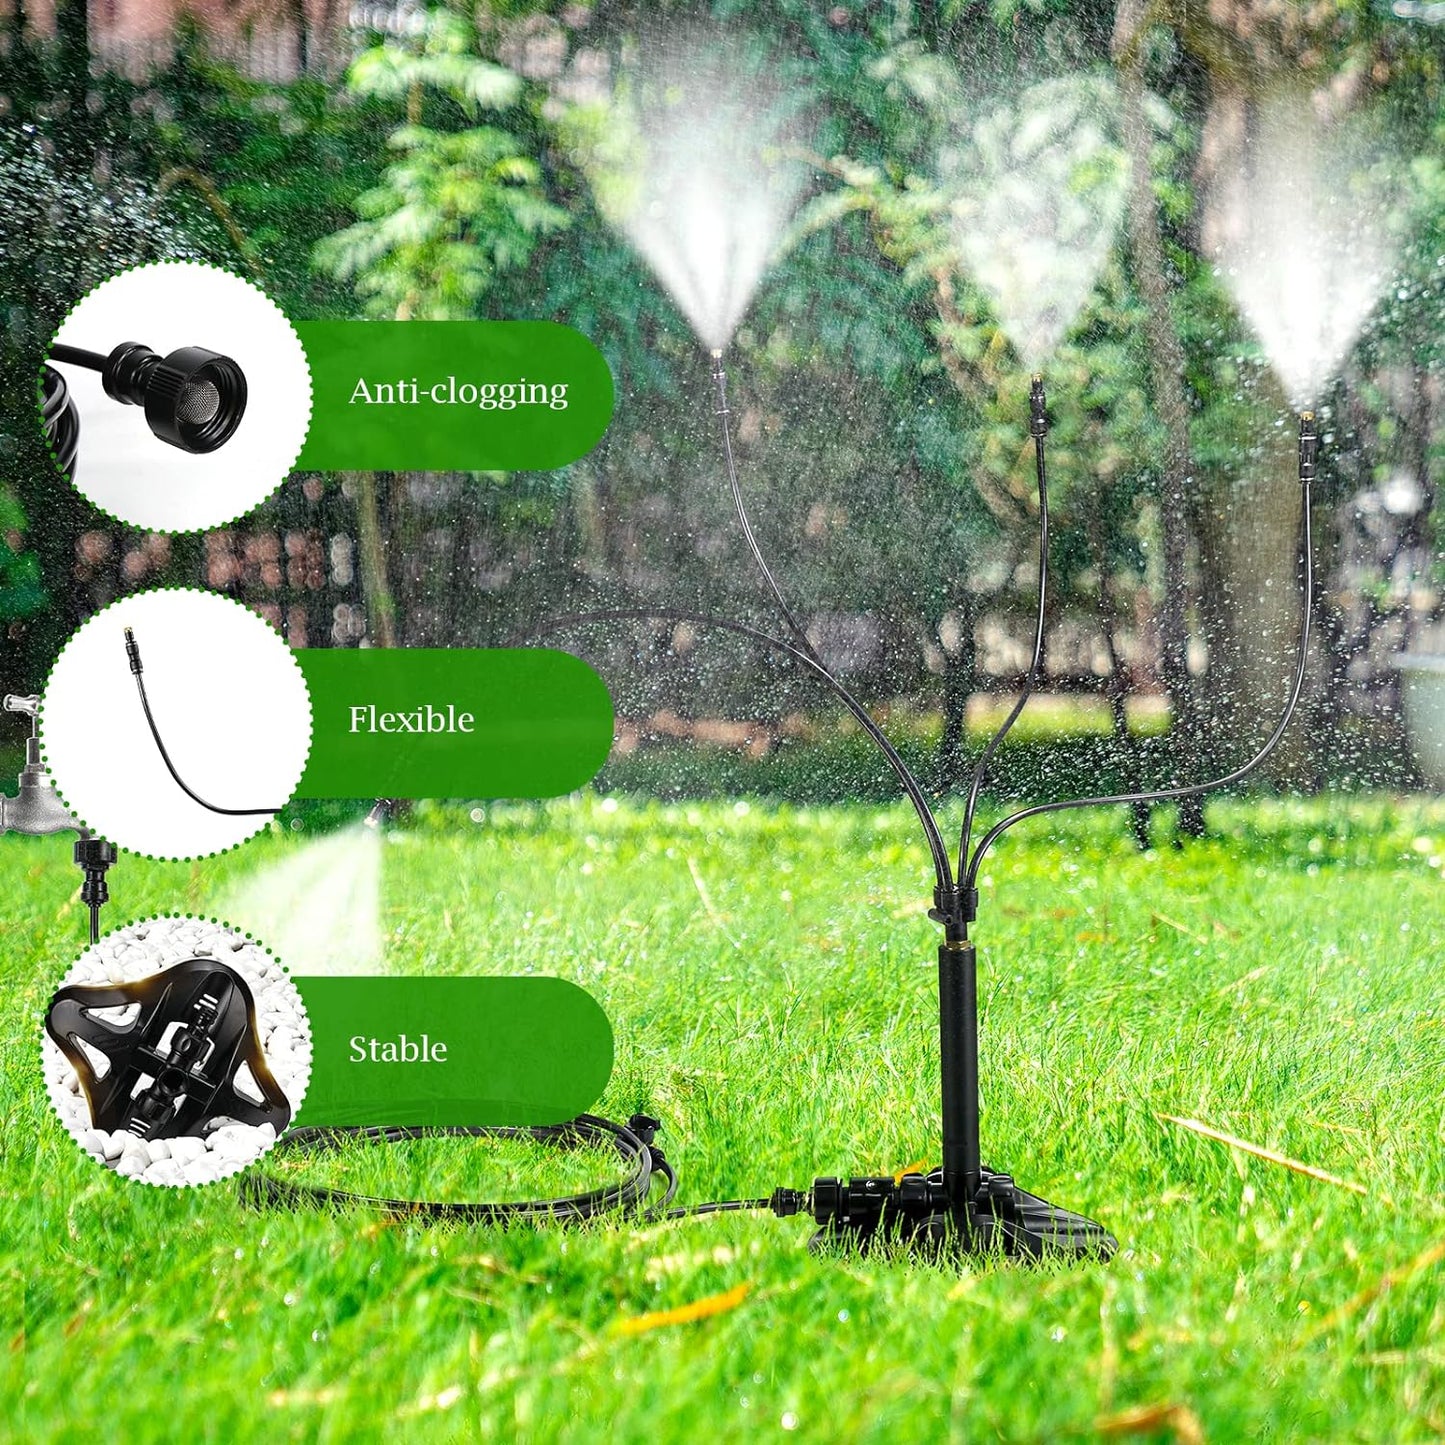 New Misters for Outside Patio - Misters for Cooling Outdoor, 360 Degrees Adjustable with 4 Brass Nozzles & 26FT Misting Line for Outdoor Cooling, Lawn Irrigation